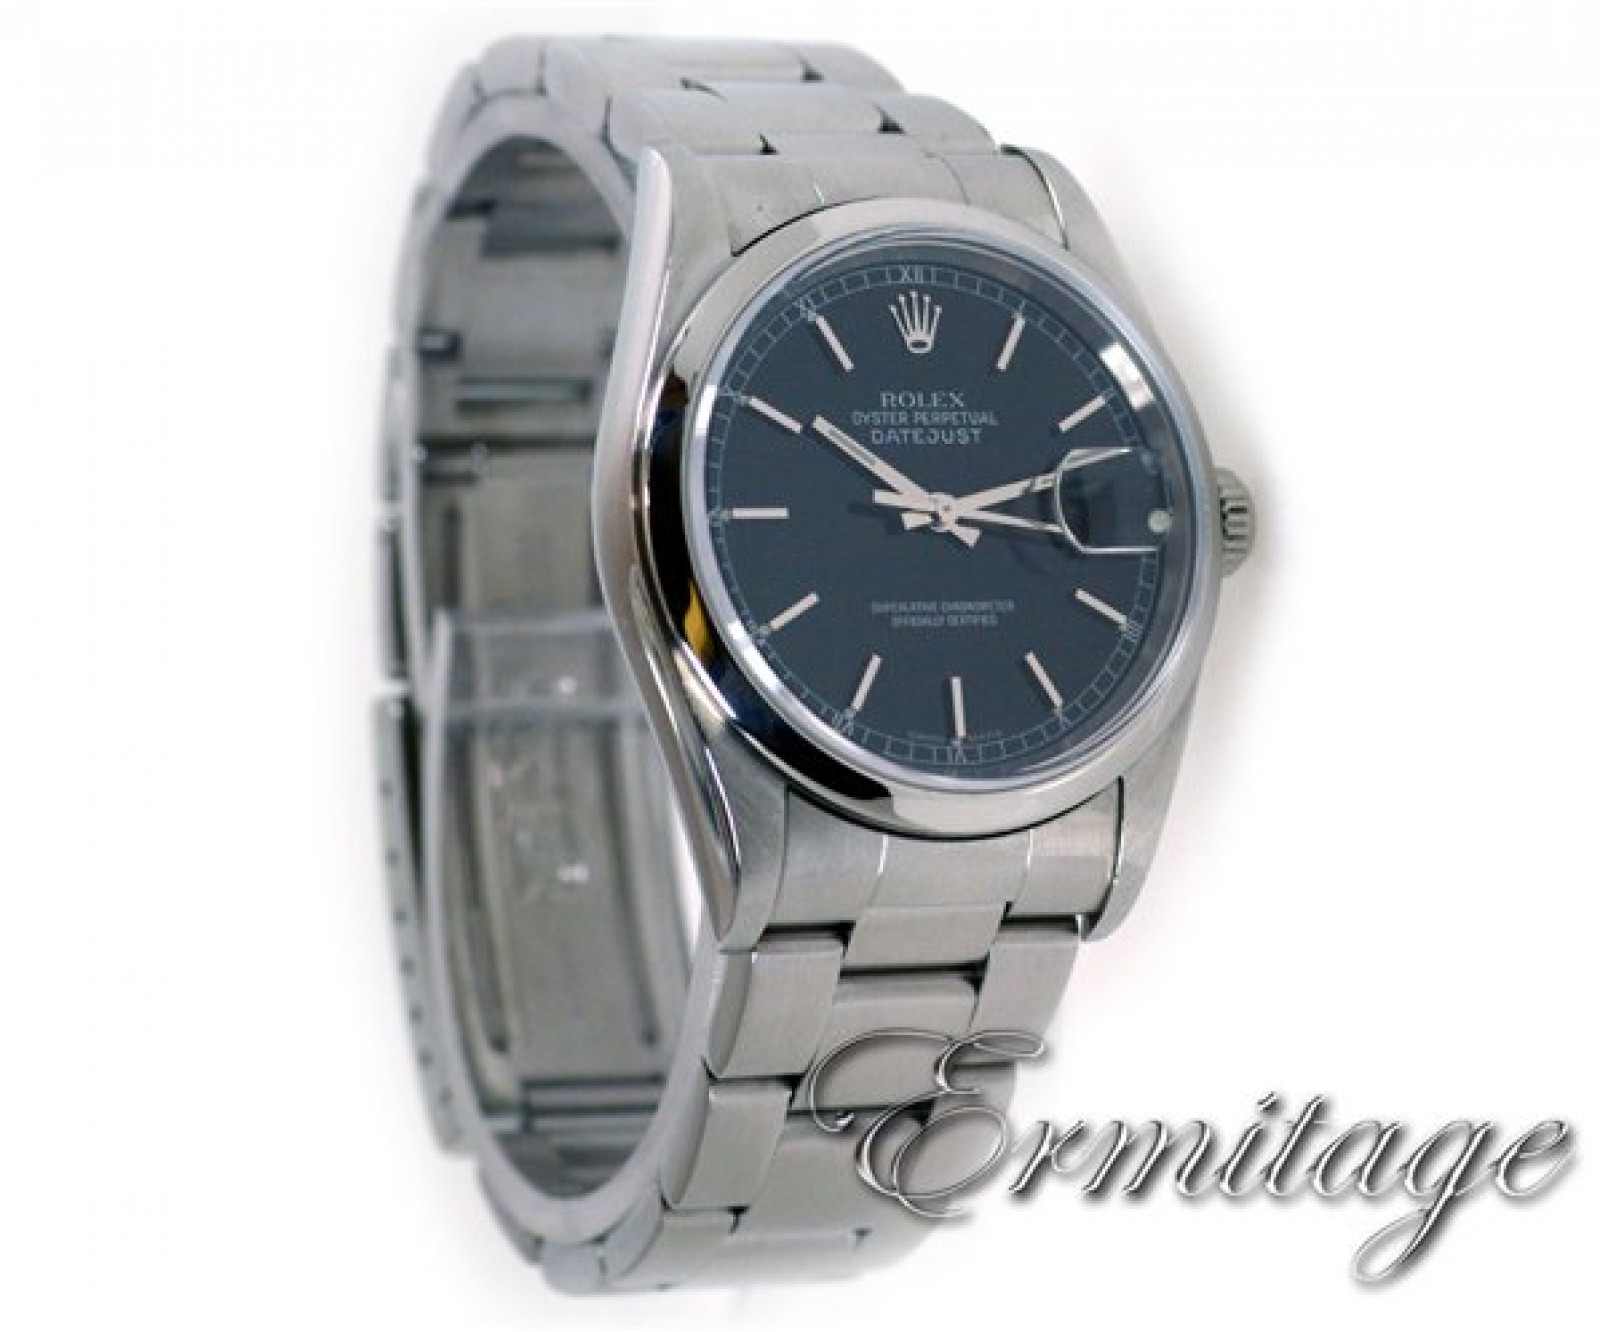 Rolex Datejust 16200 Steel with Black Dial